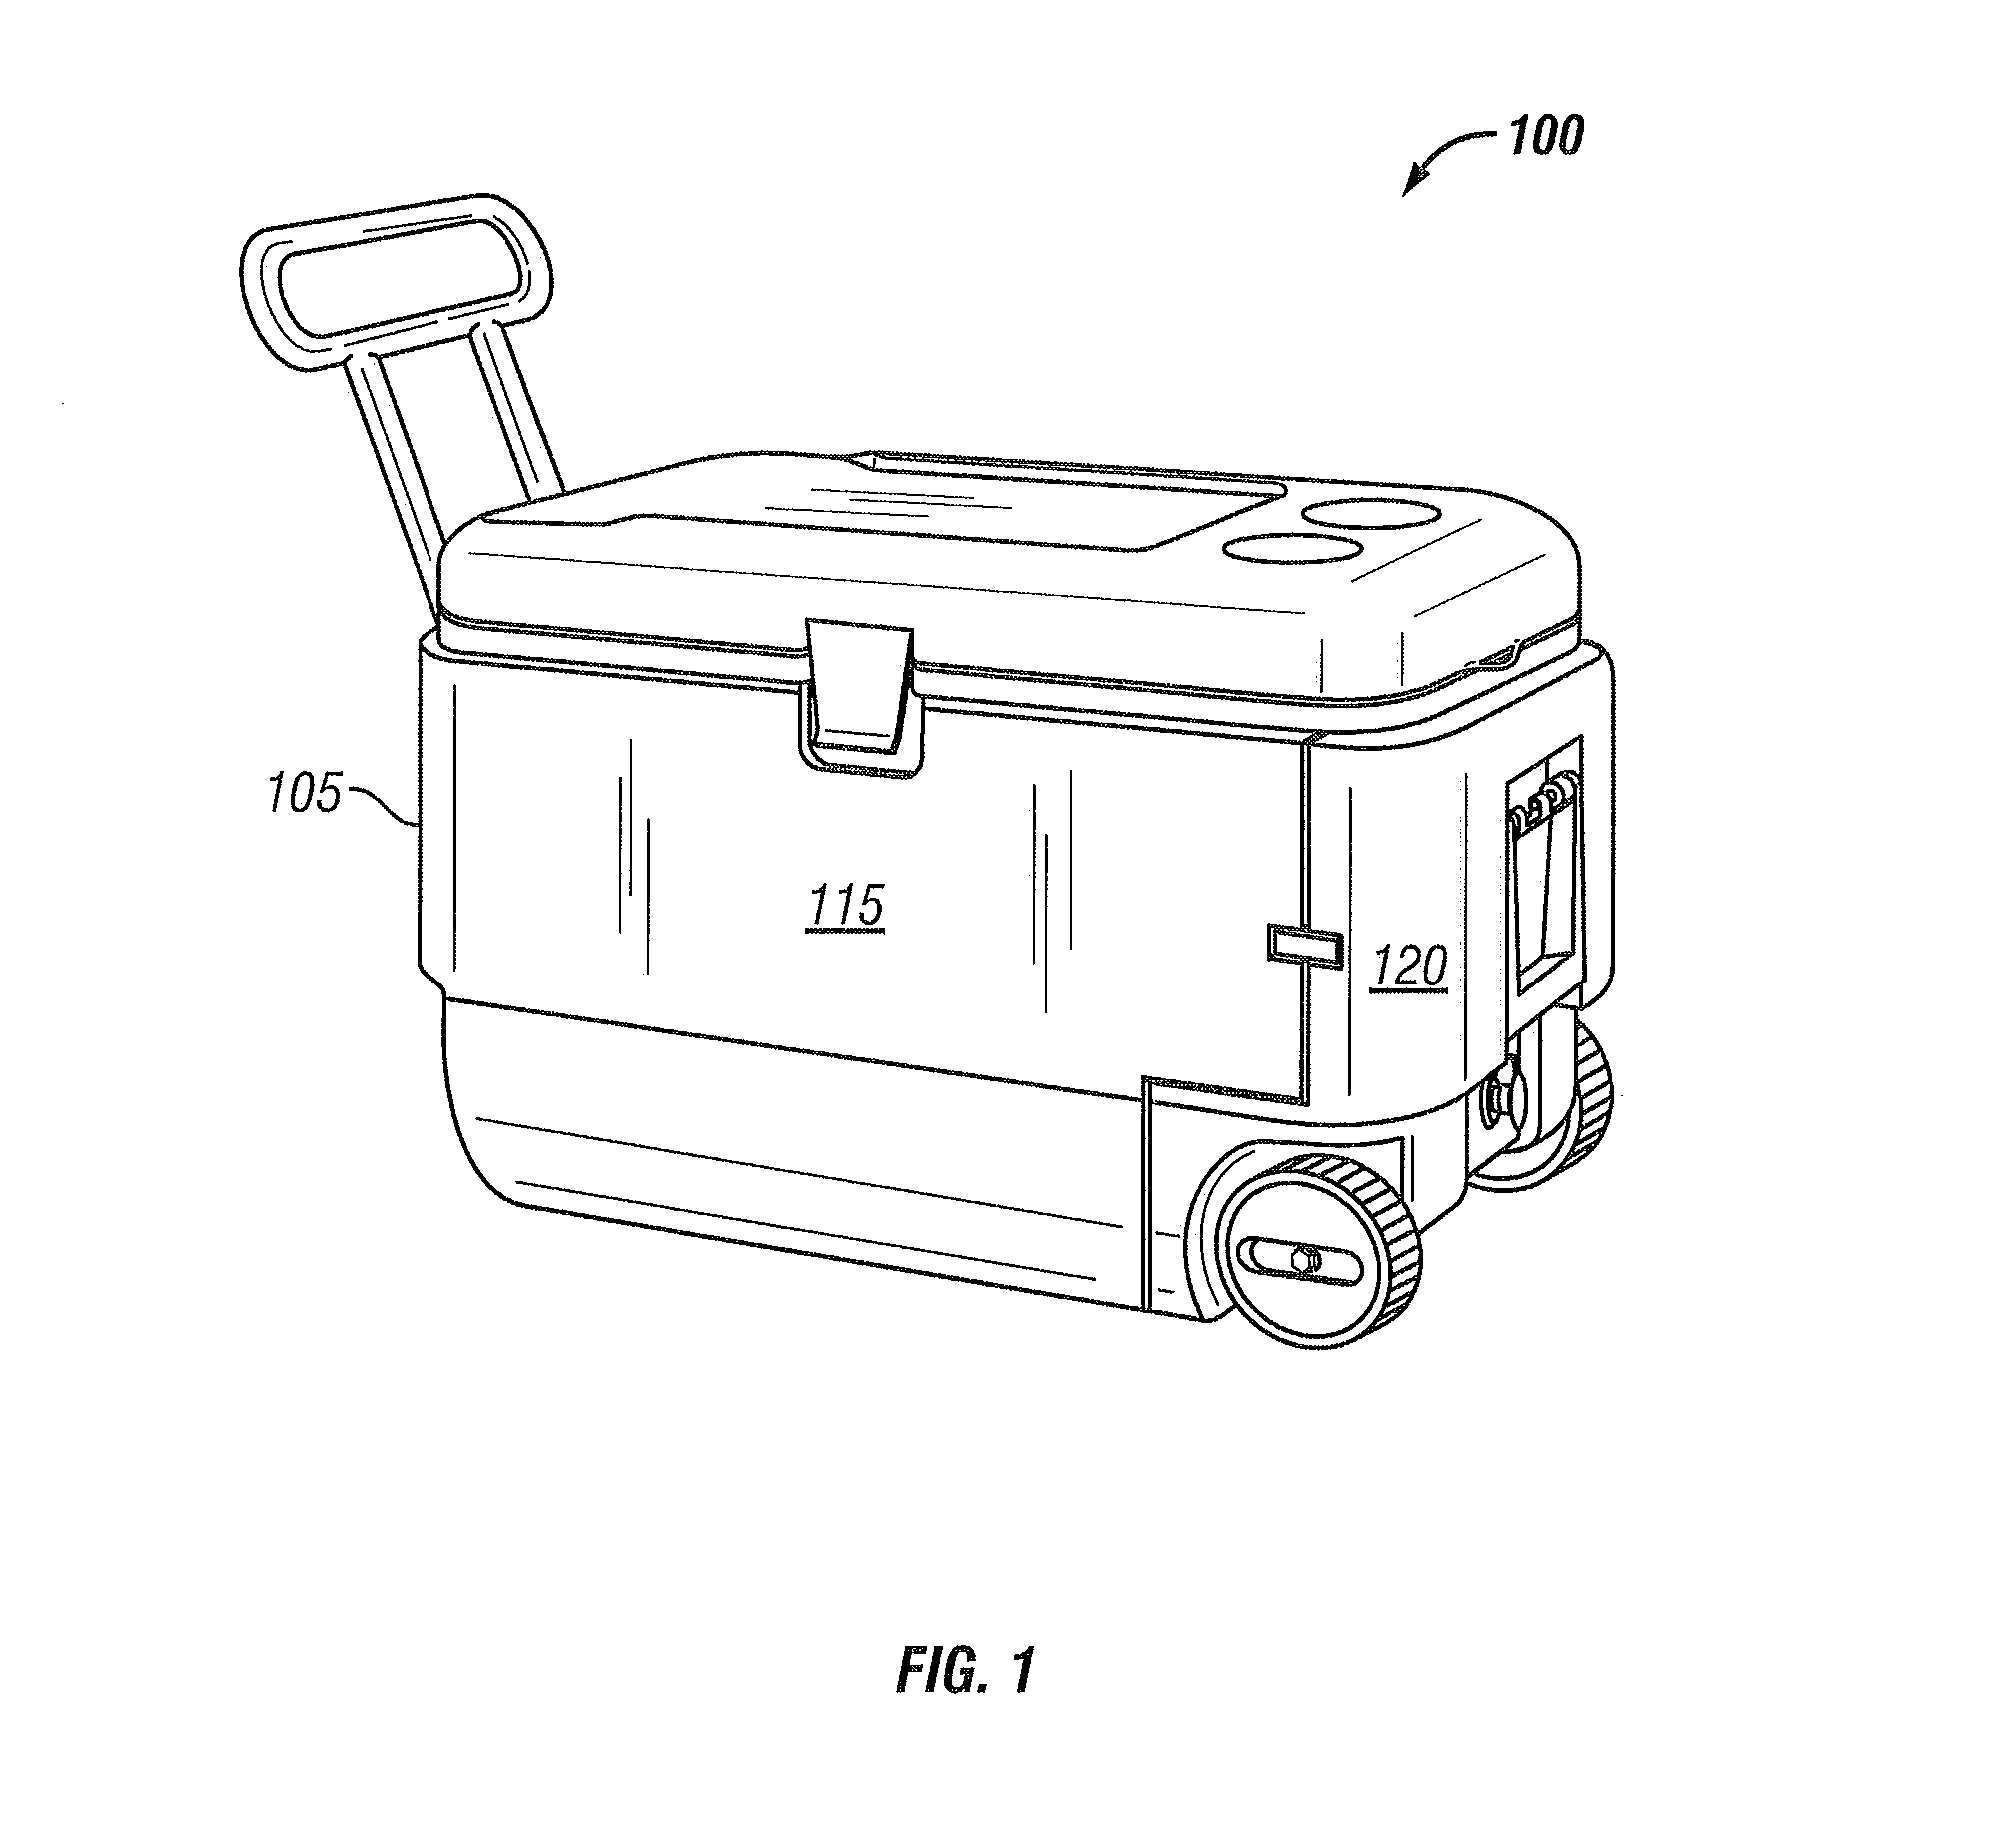 Portable Cooler Having an Extendable Drawer System